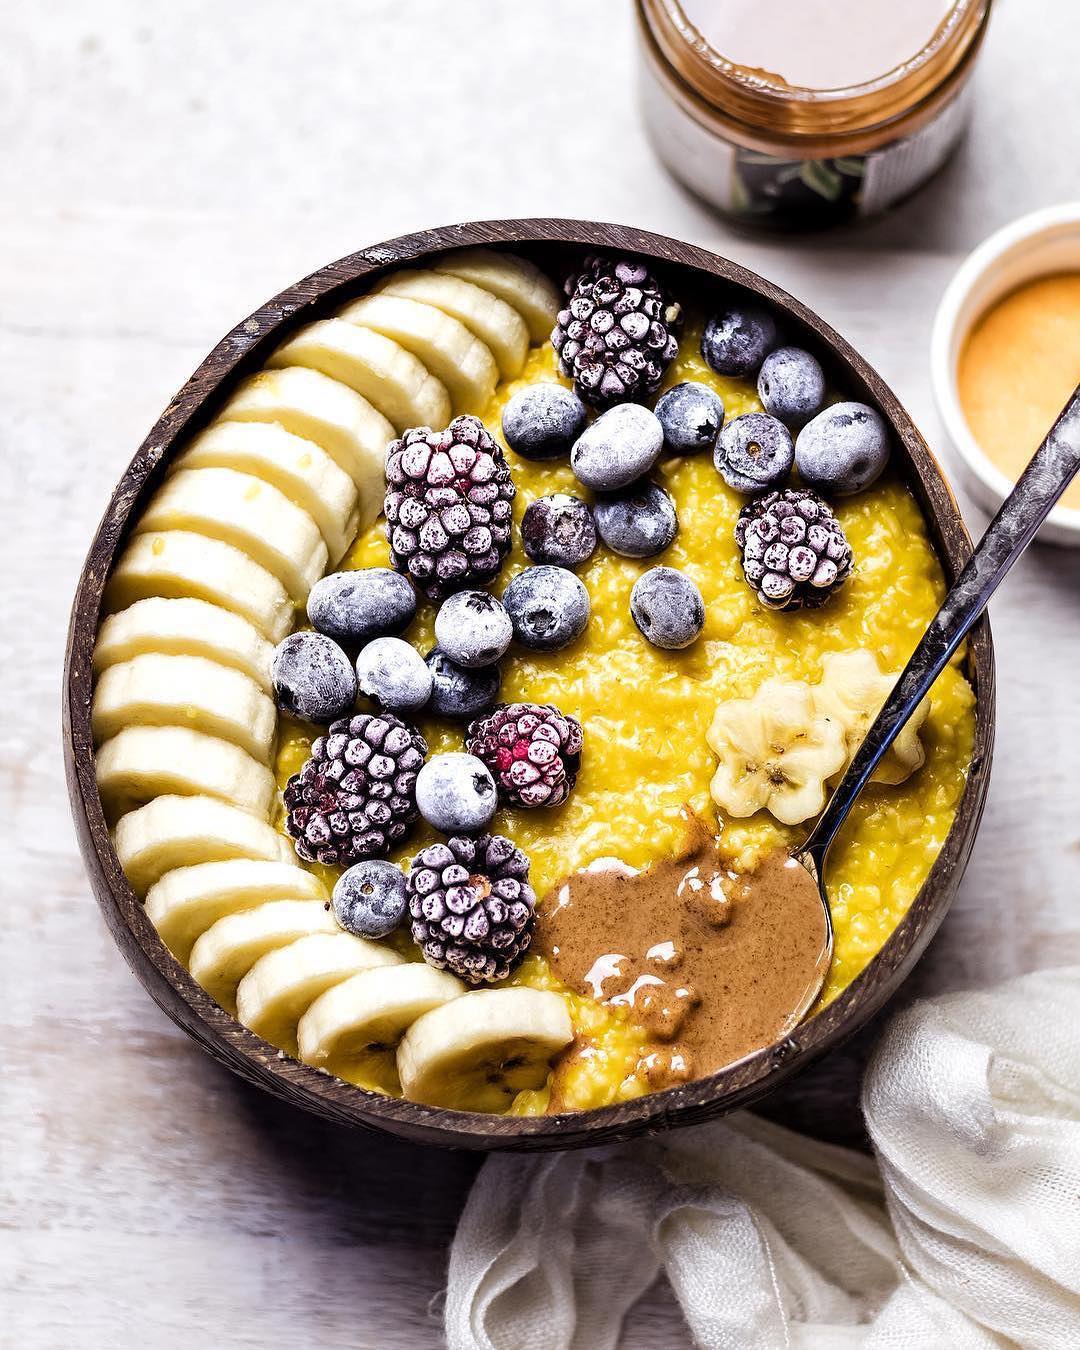 Golden Oatmeal Bowl with Berries, Banana, and Almond Butter